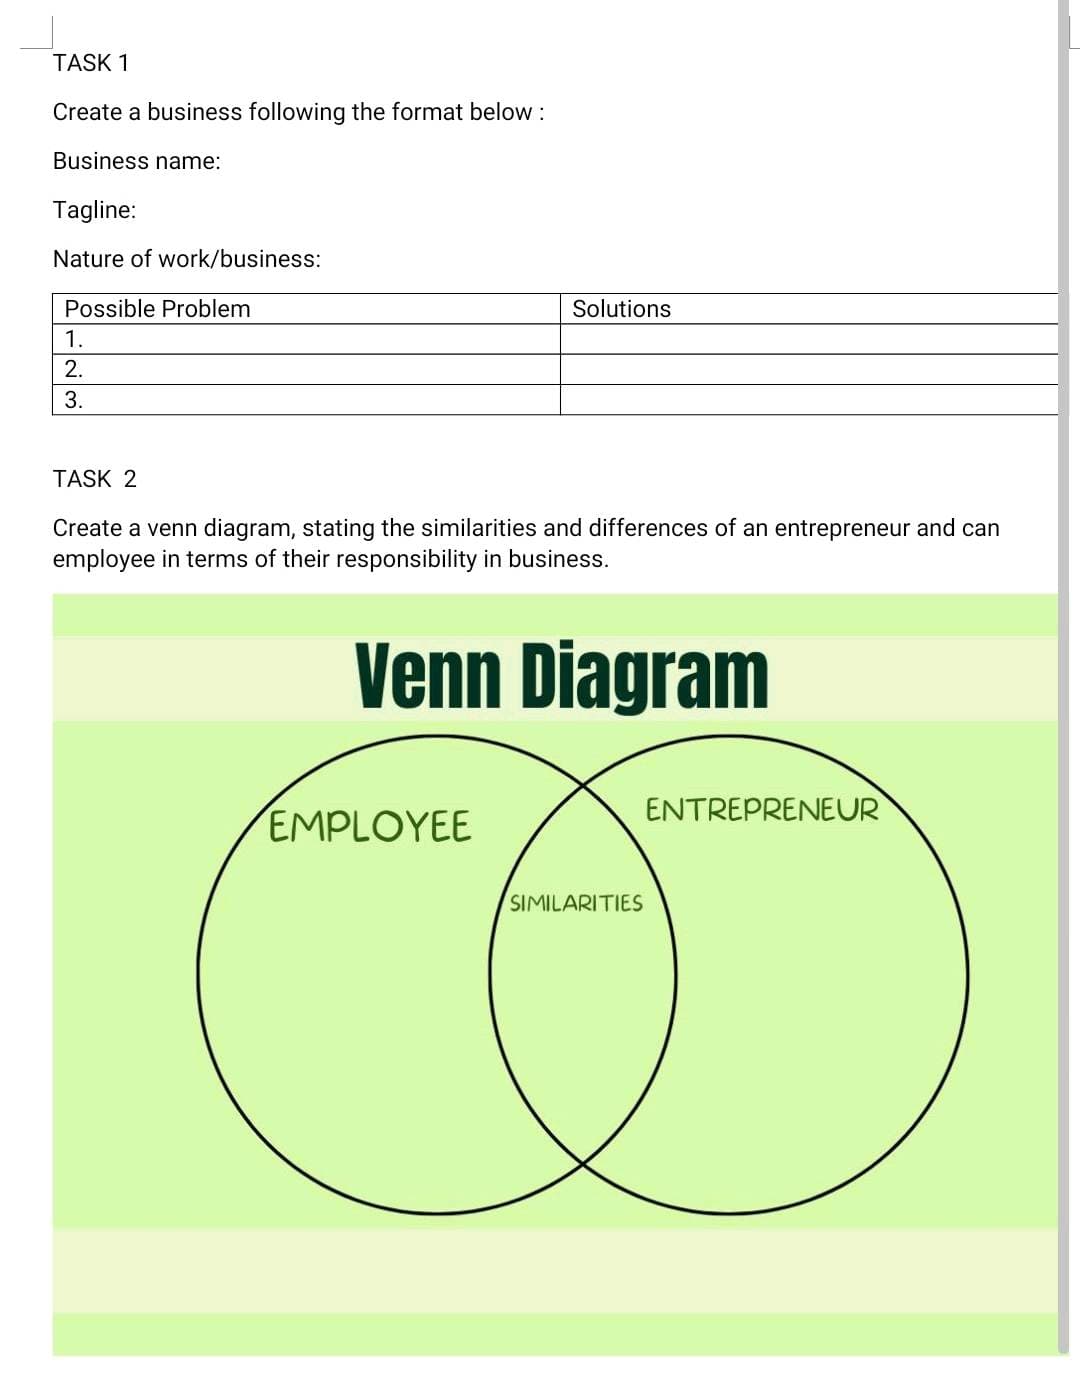 TASK 1
Create a business following the format below :
Business name:
Tagline:
Nature of work/business:
Possible Problem
1.
2.
3.
Solutions
TASK 2
Create a venn diagram, stating the similarities and differences of an entrepreneur and can
employee in terms of their responsibility in business.
Venn Diagram
EMPLOYEE
SIMILARITIES
ENTREPRENEUR